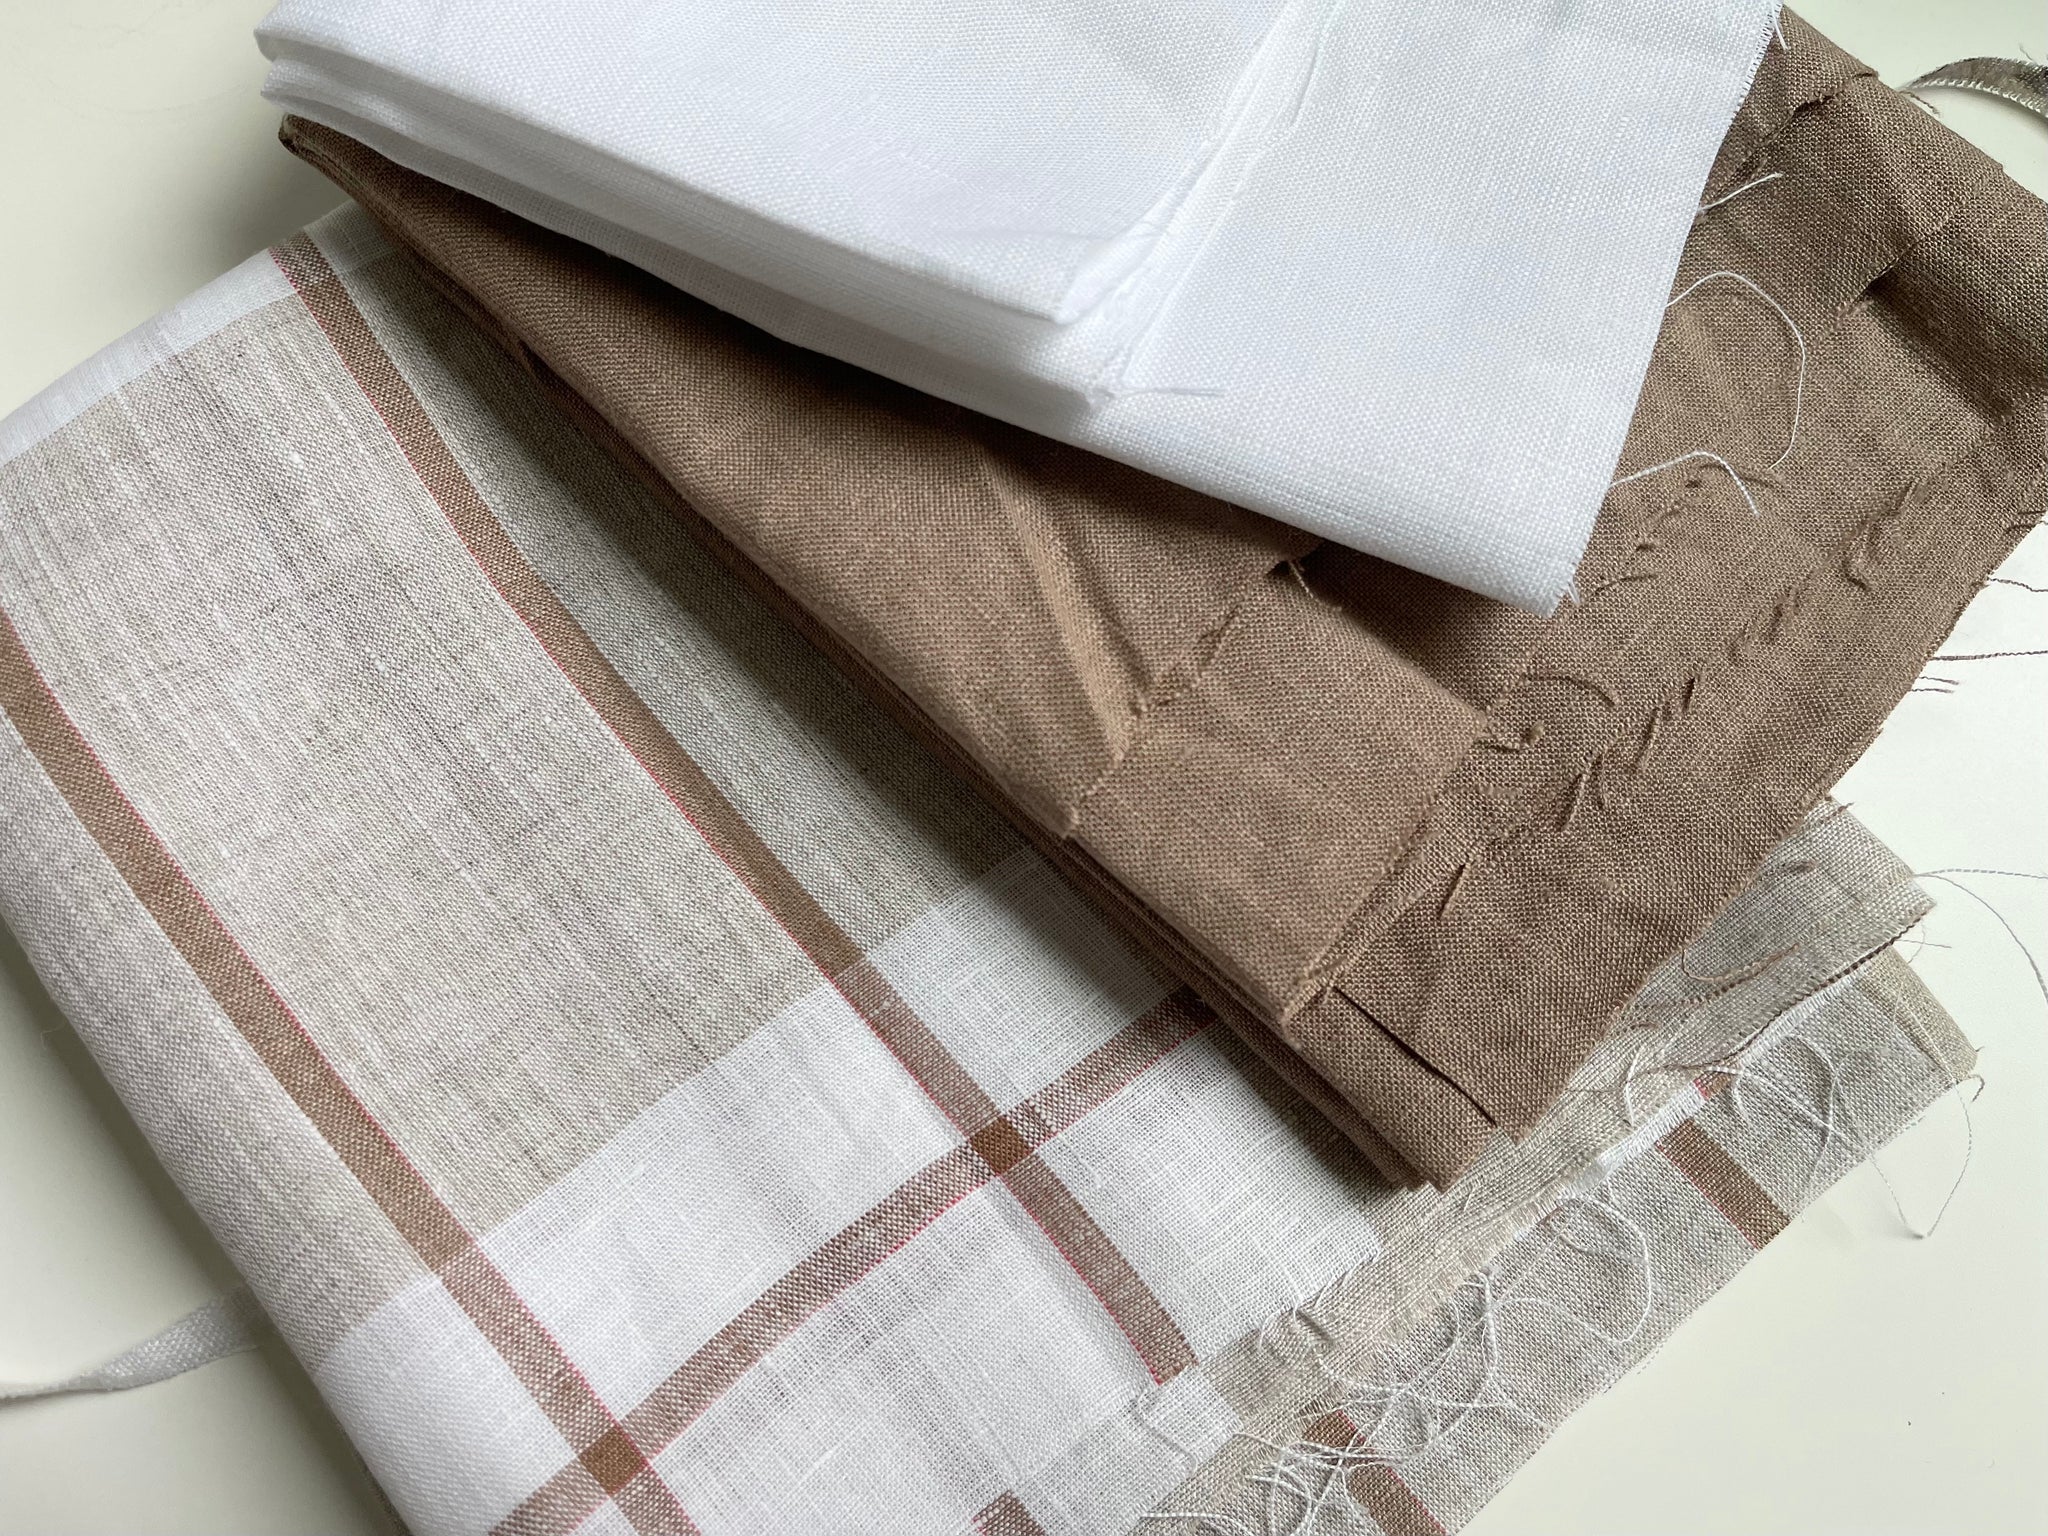 Linen Fabric Remnants - Pure White, Desert Clay, White Natural Plaid